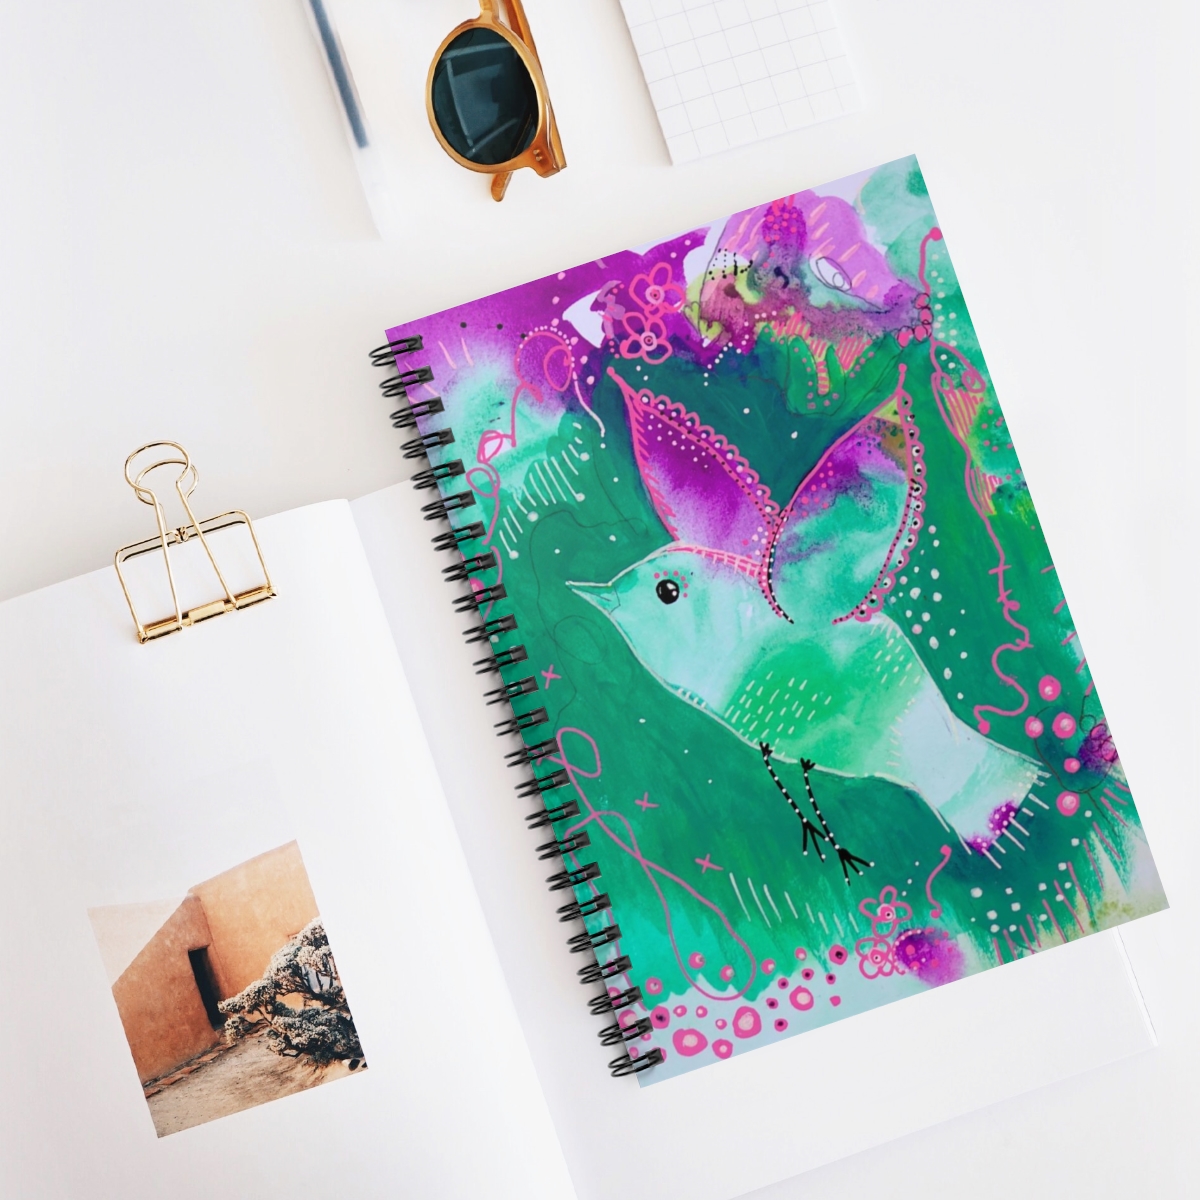 bird journal in context. Bird flying is created from green and violet tones that match her background.